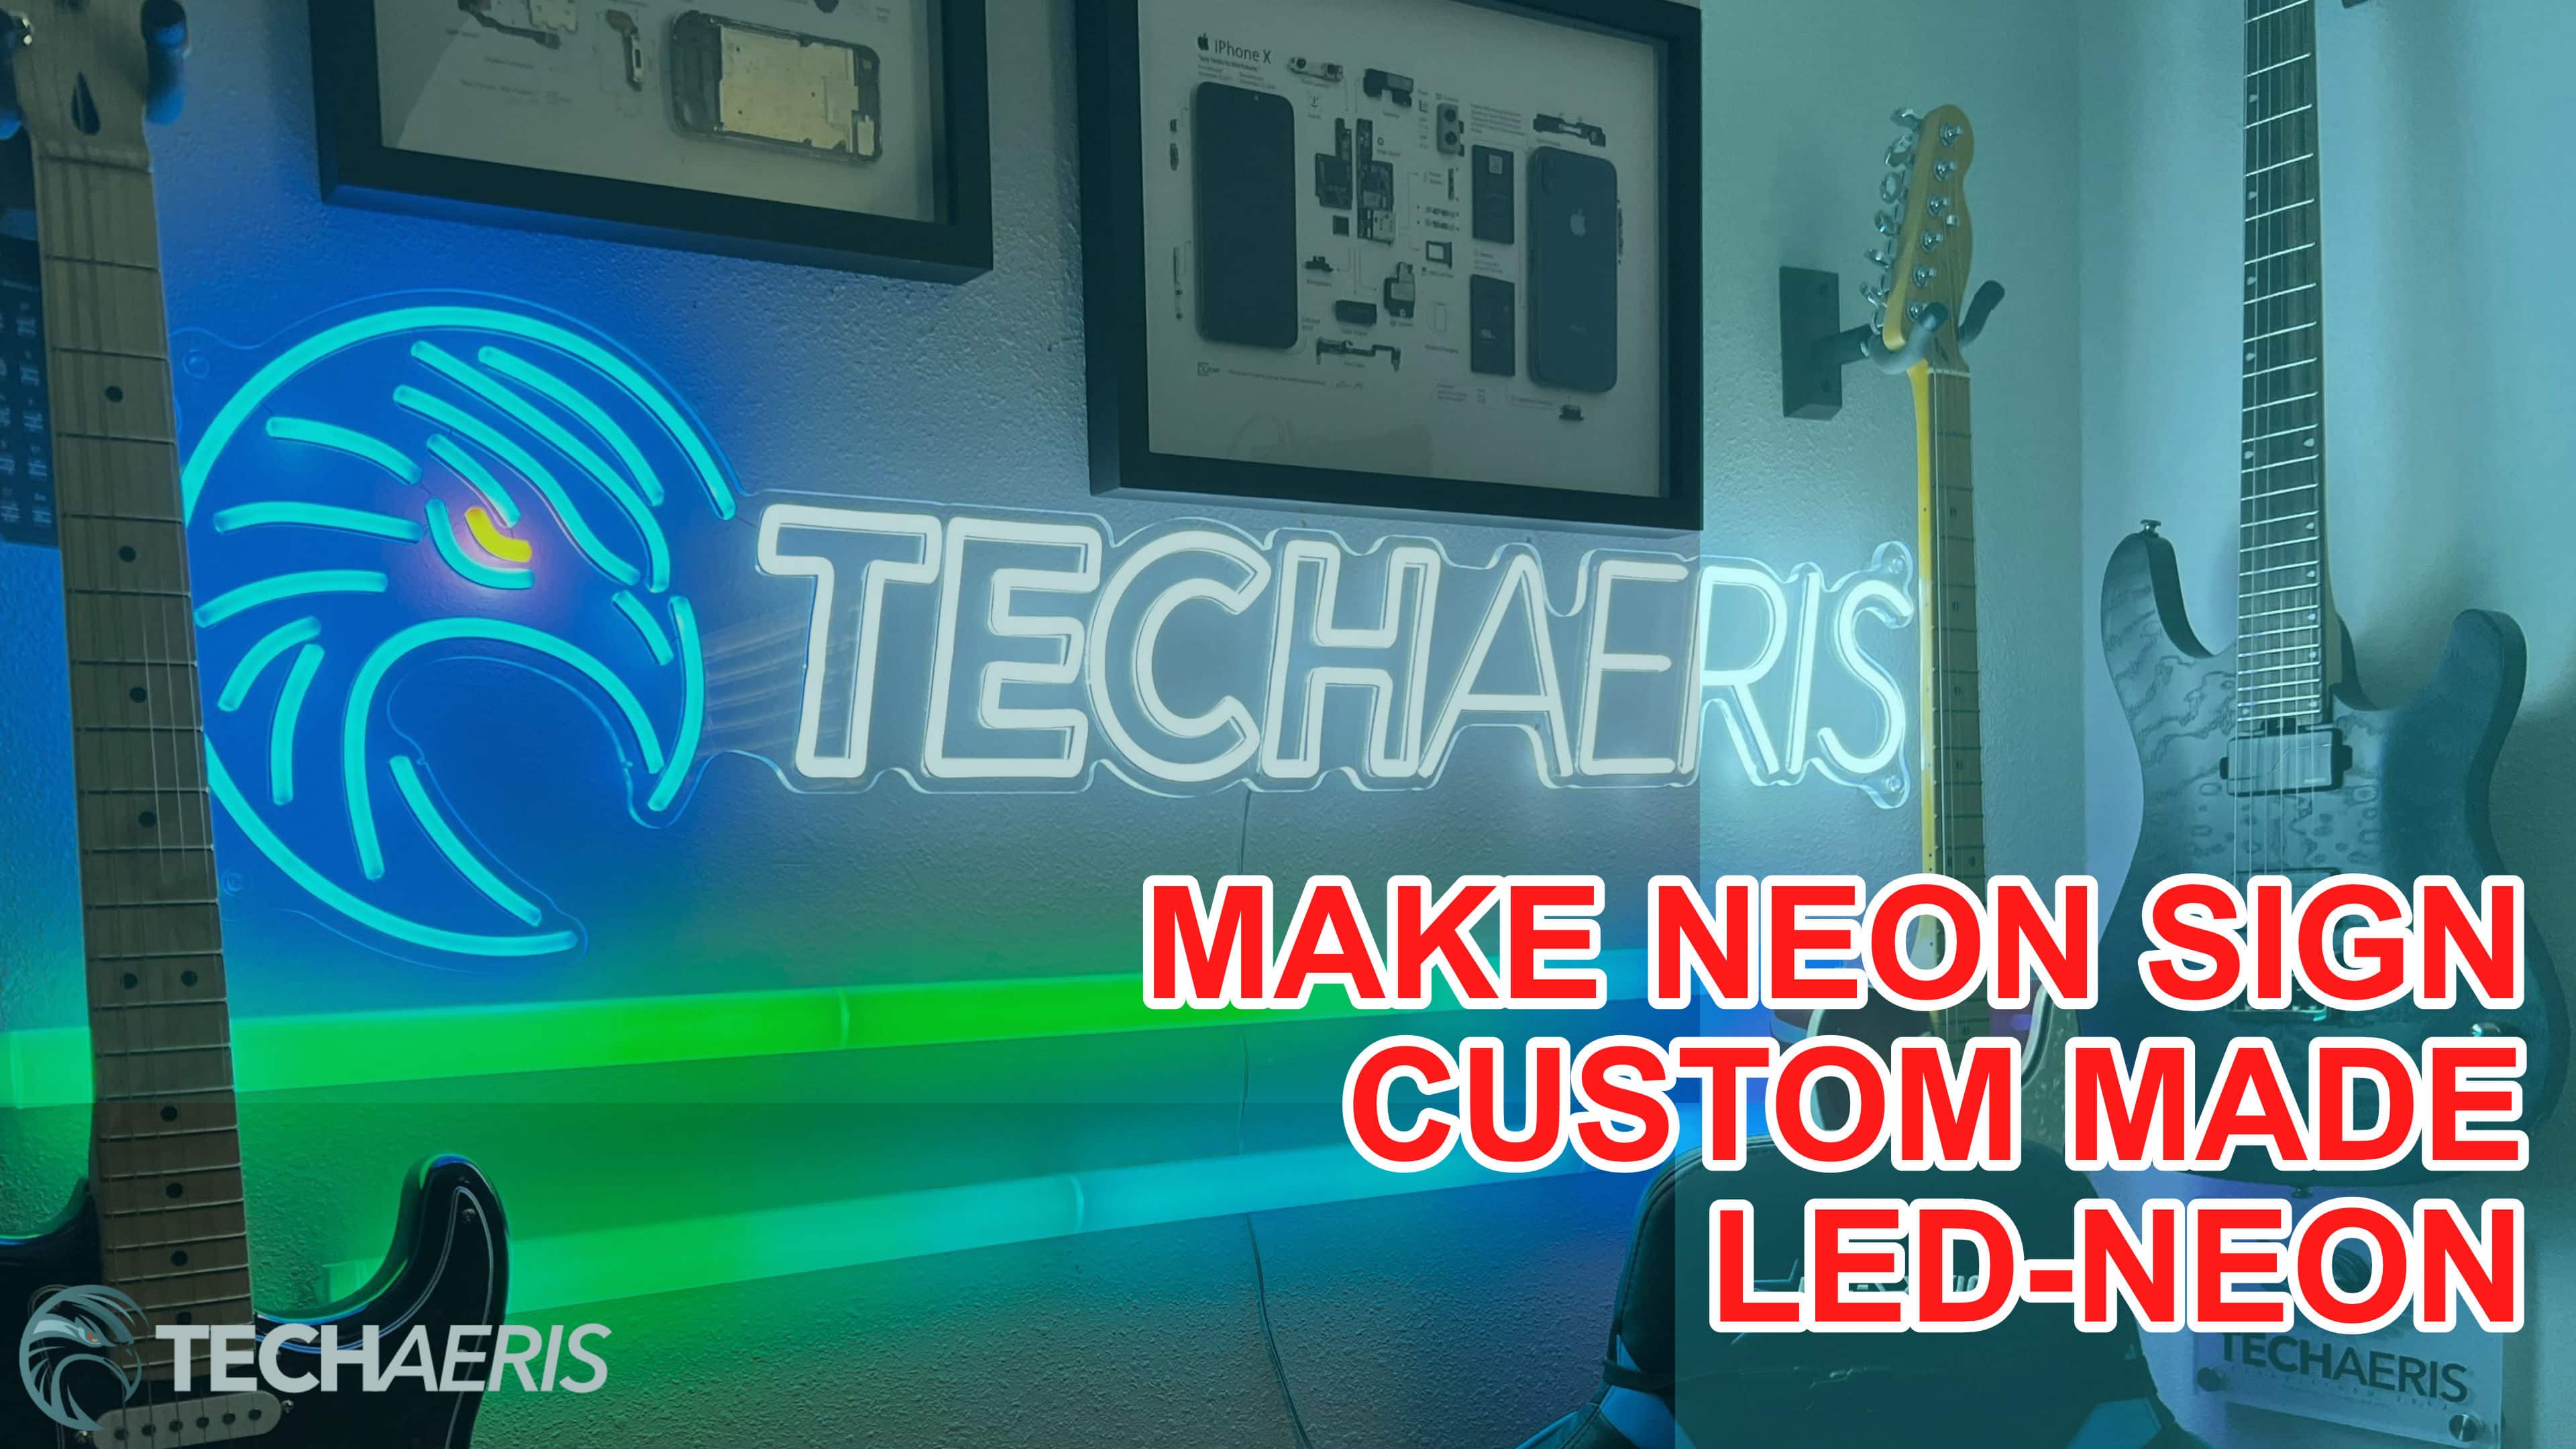 'Video thumbnail for Make Neon Sign - Custom Made LED Neon Signs'